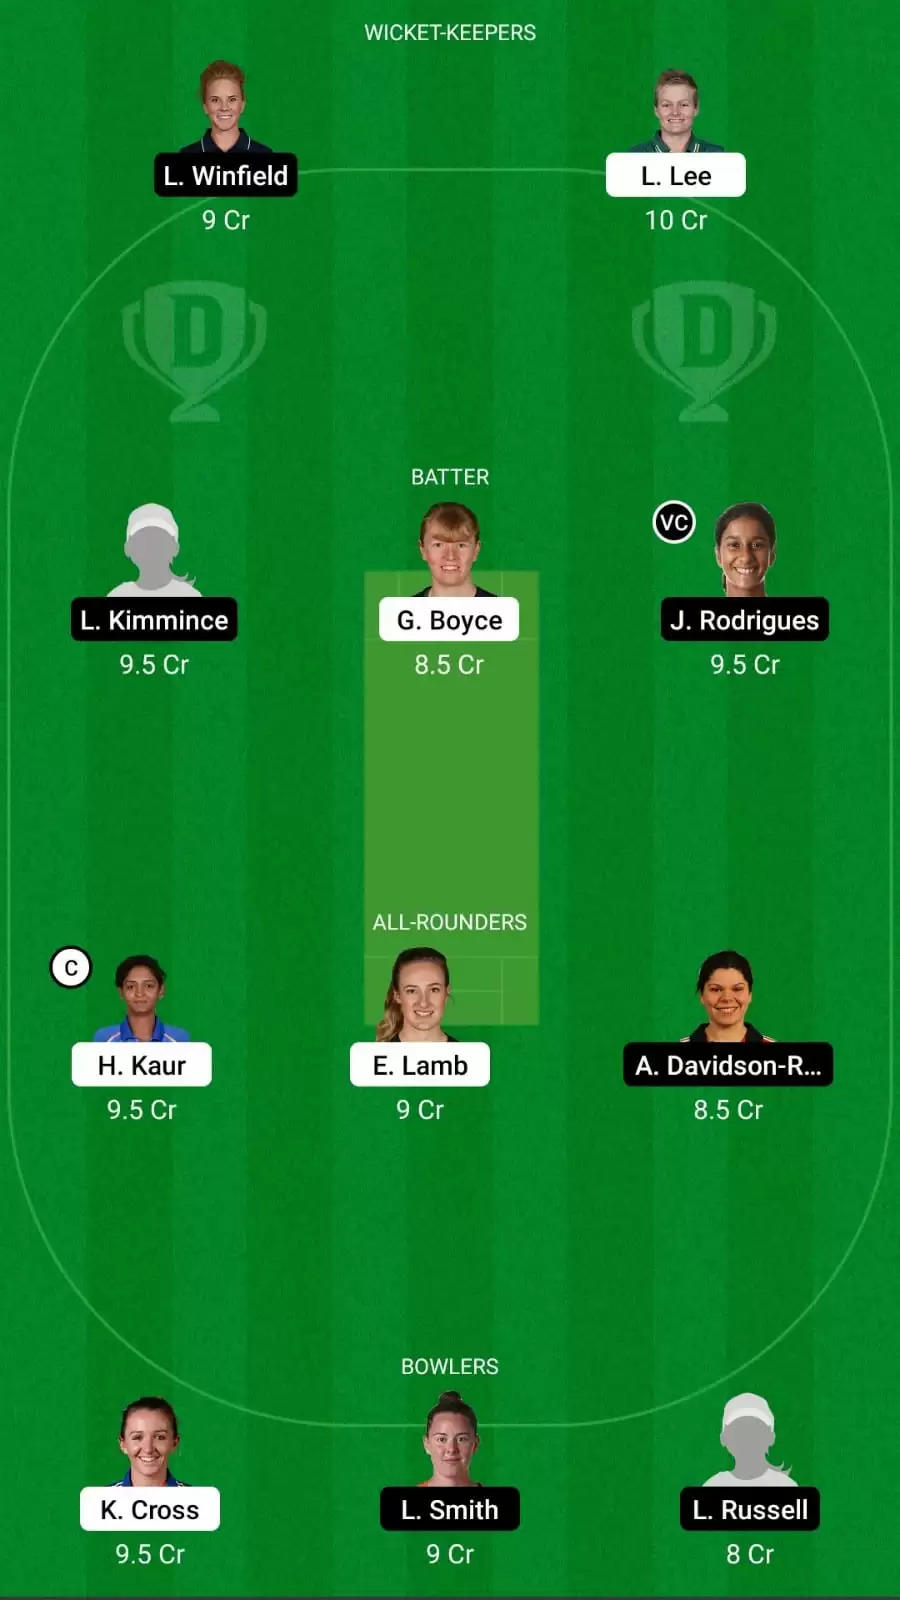 MNR-W vs NOS-W Dream11 Team Prediction for The Hundred Women’s 2021: Manchester Originals Women vs Northern Superchargers Women Preview